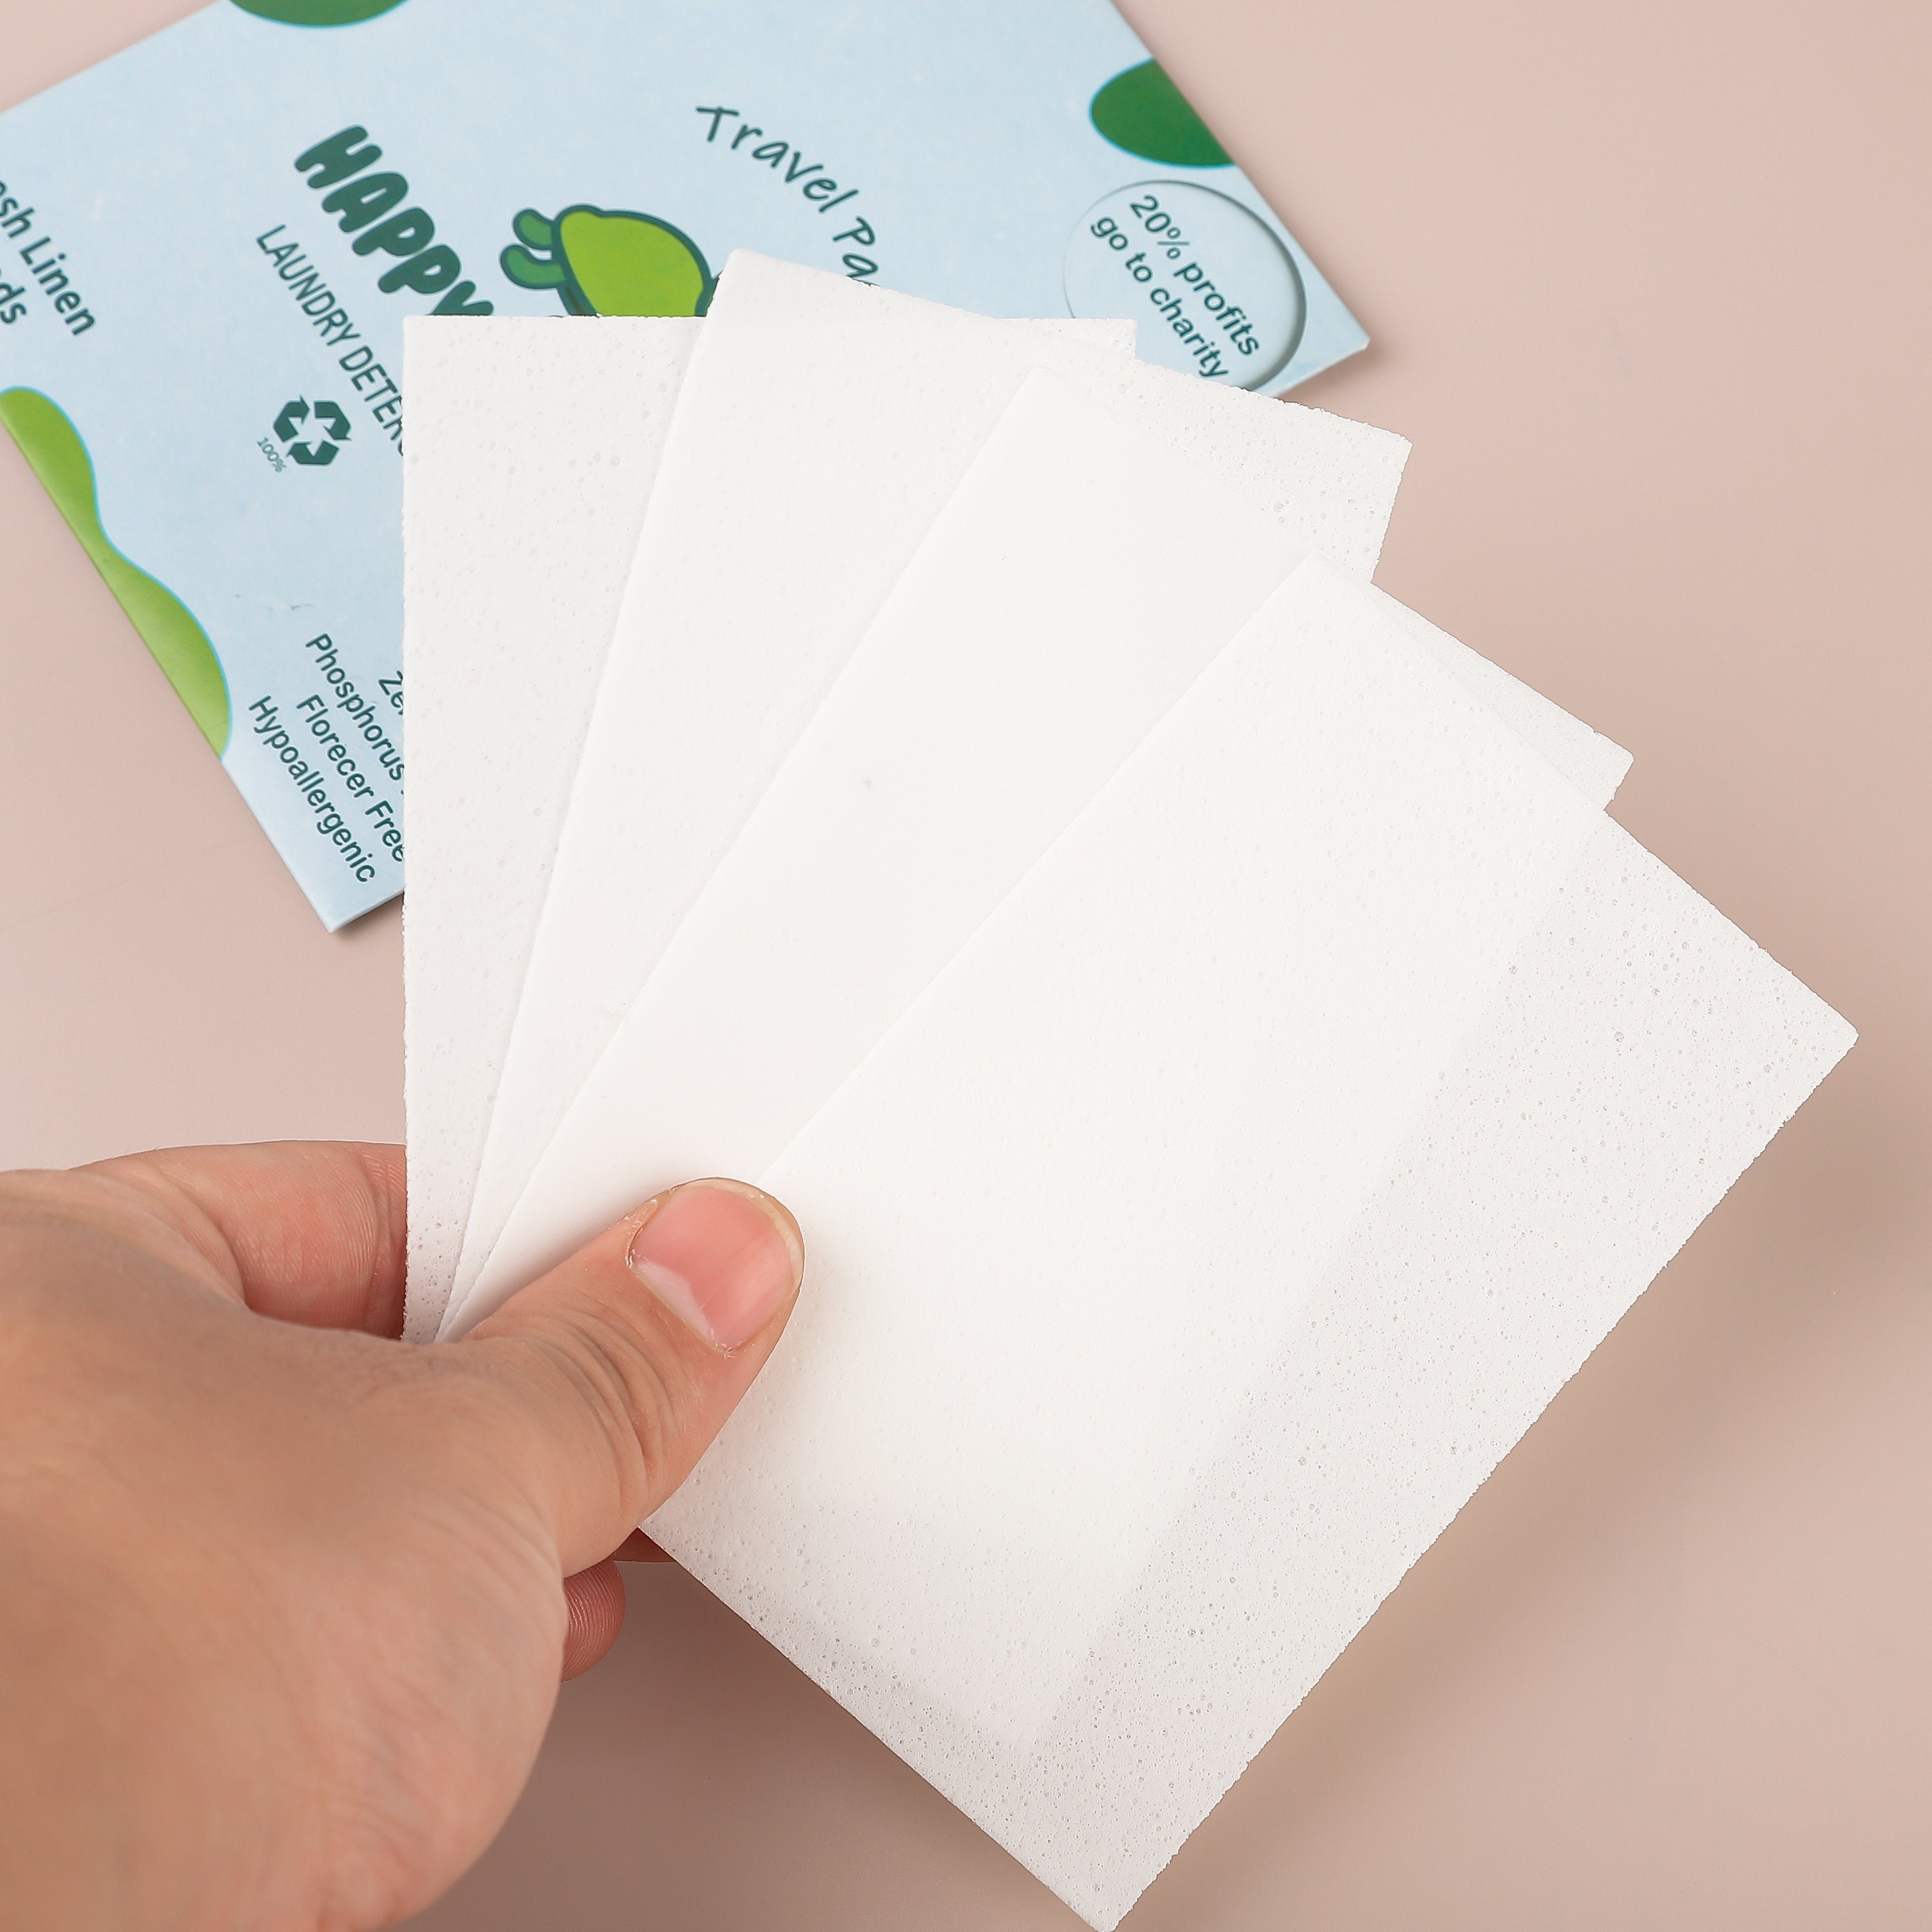 Laundry Detergent Sheets – Tortuga